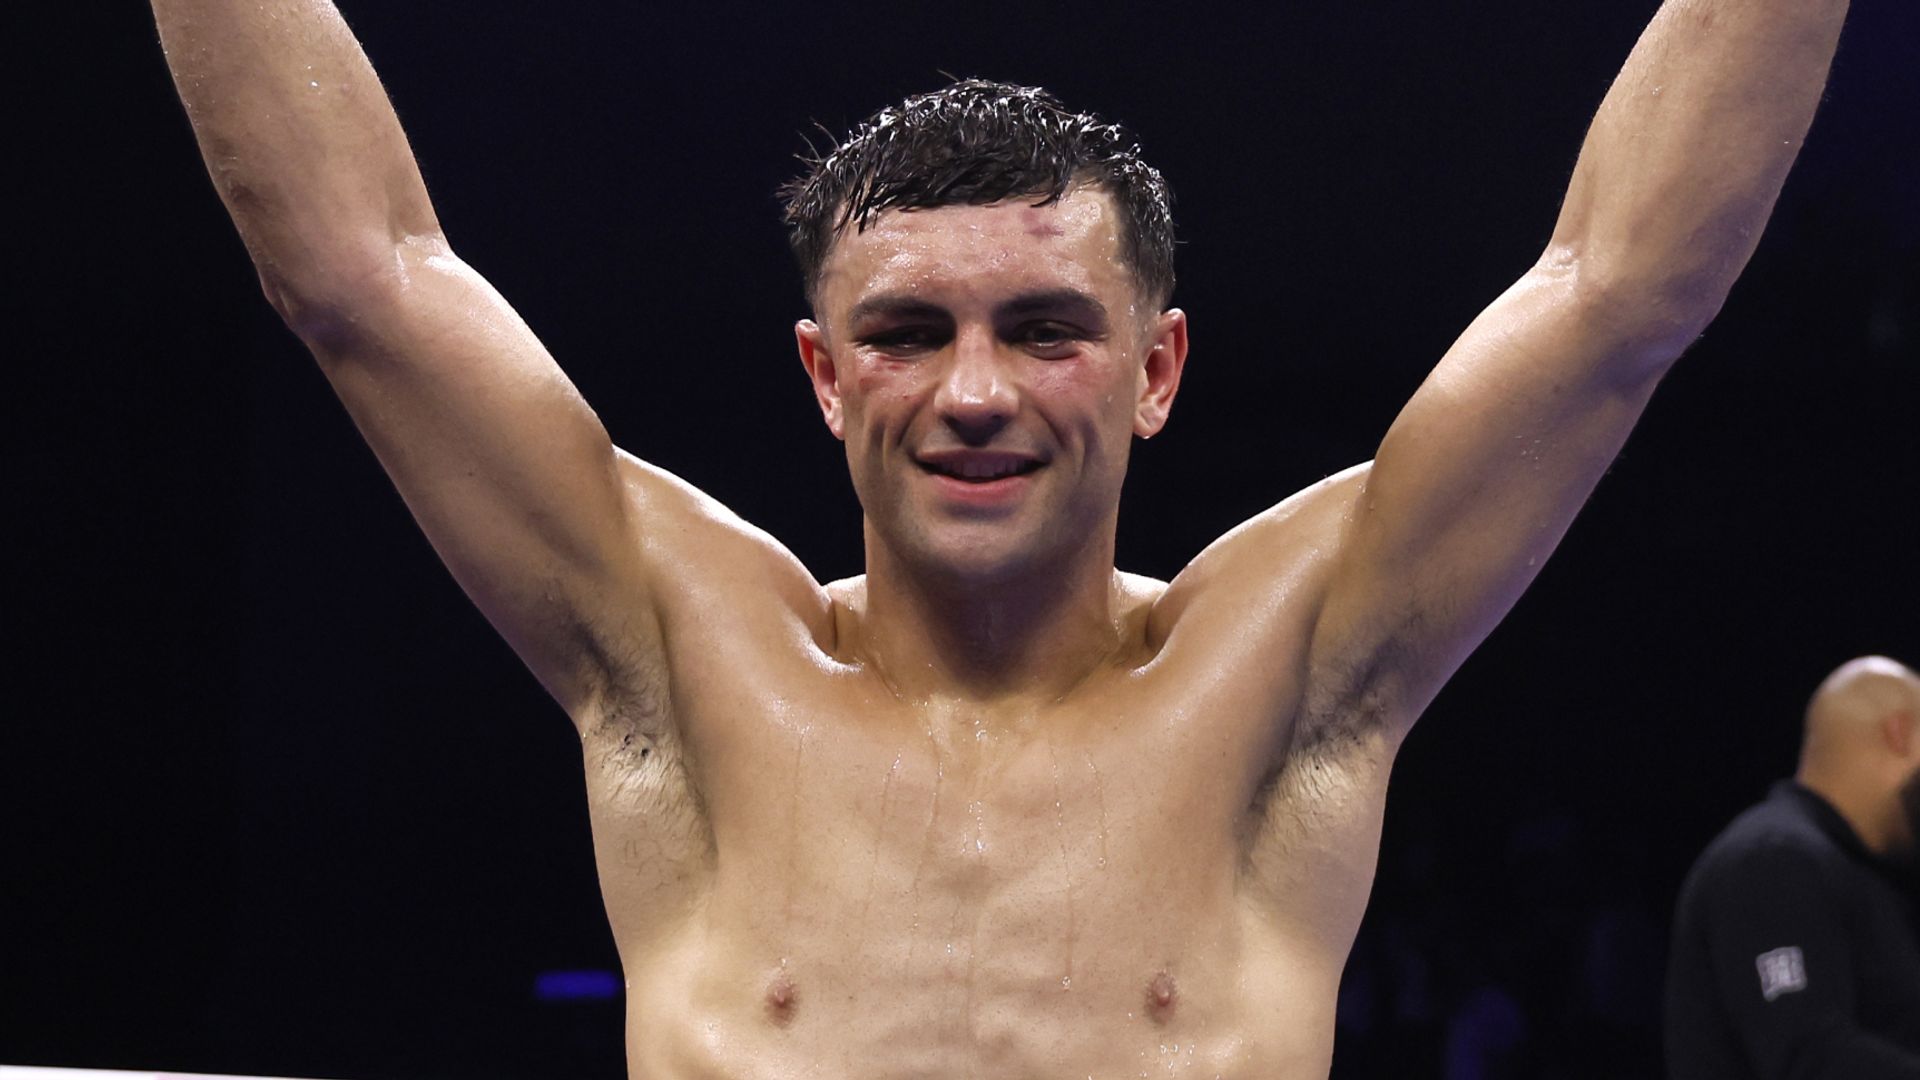 Catterall beats Taylor by unanimous decision in epic rematch